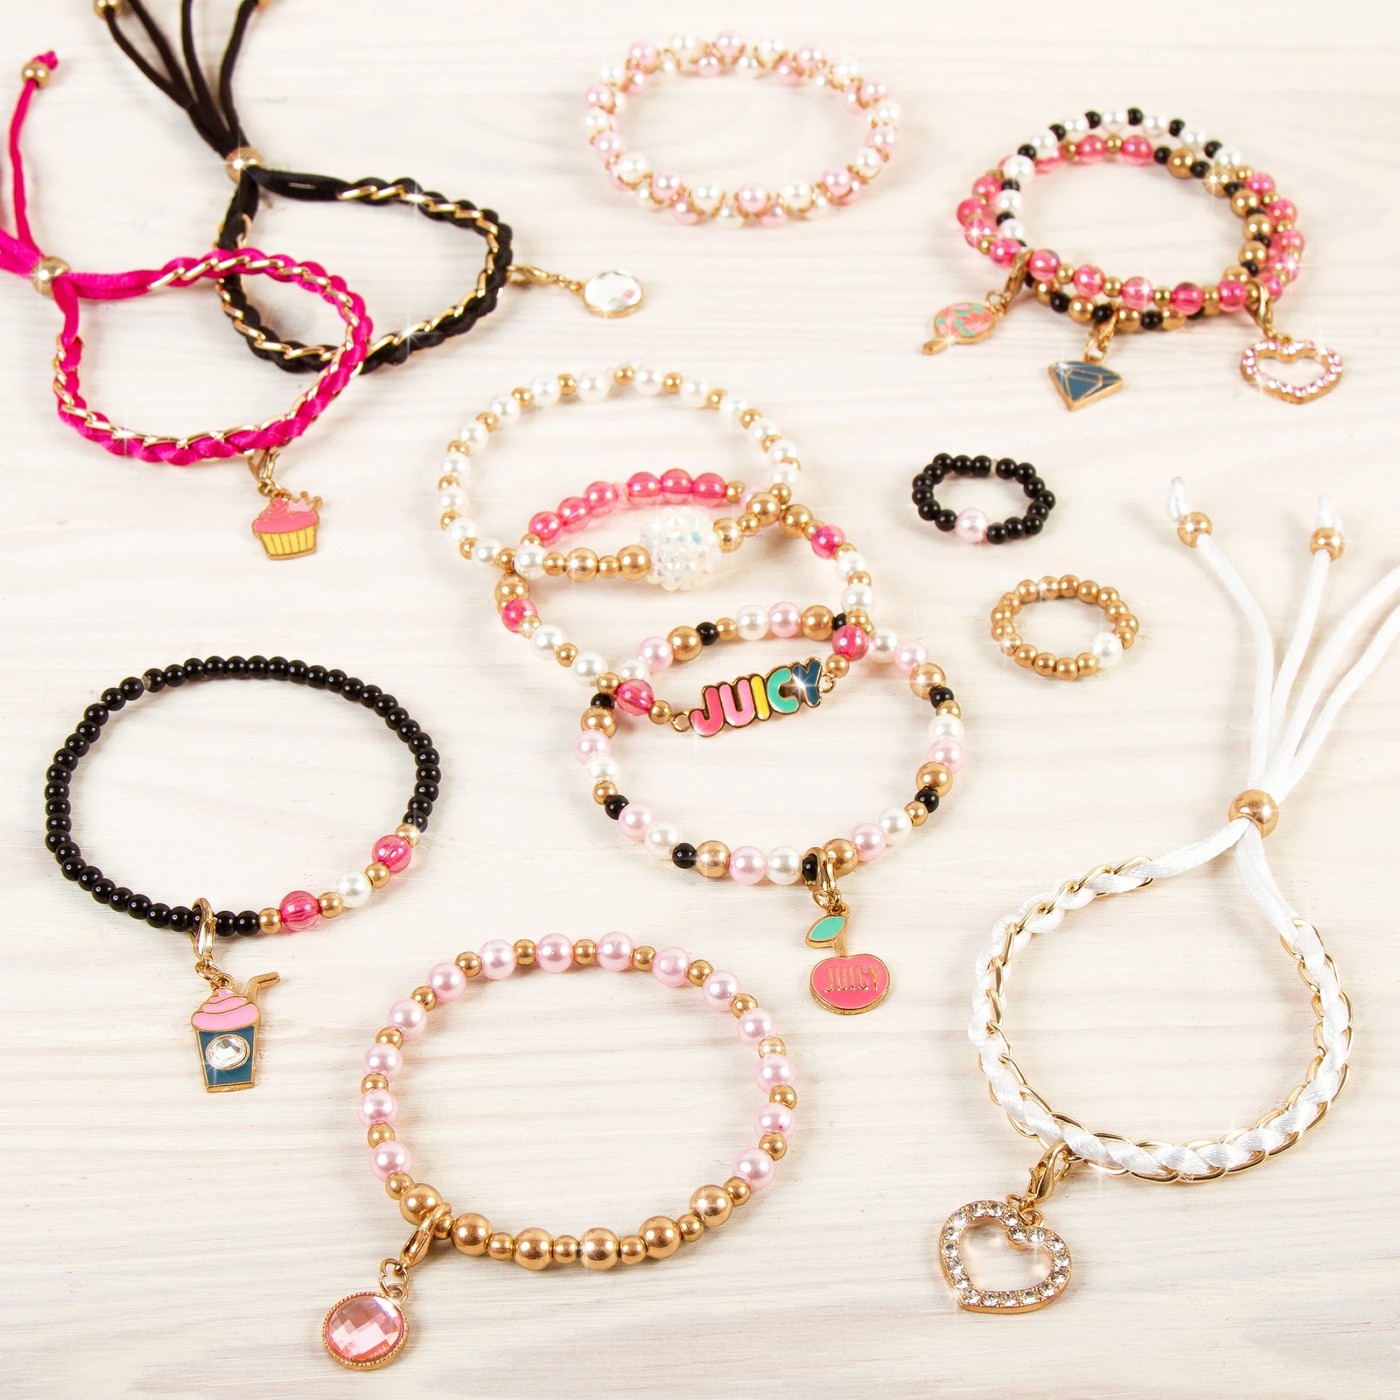 Juicy Couture Pink and Precious Bracelets